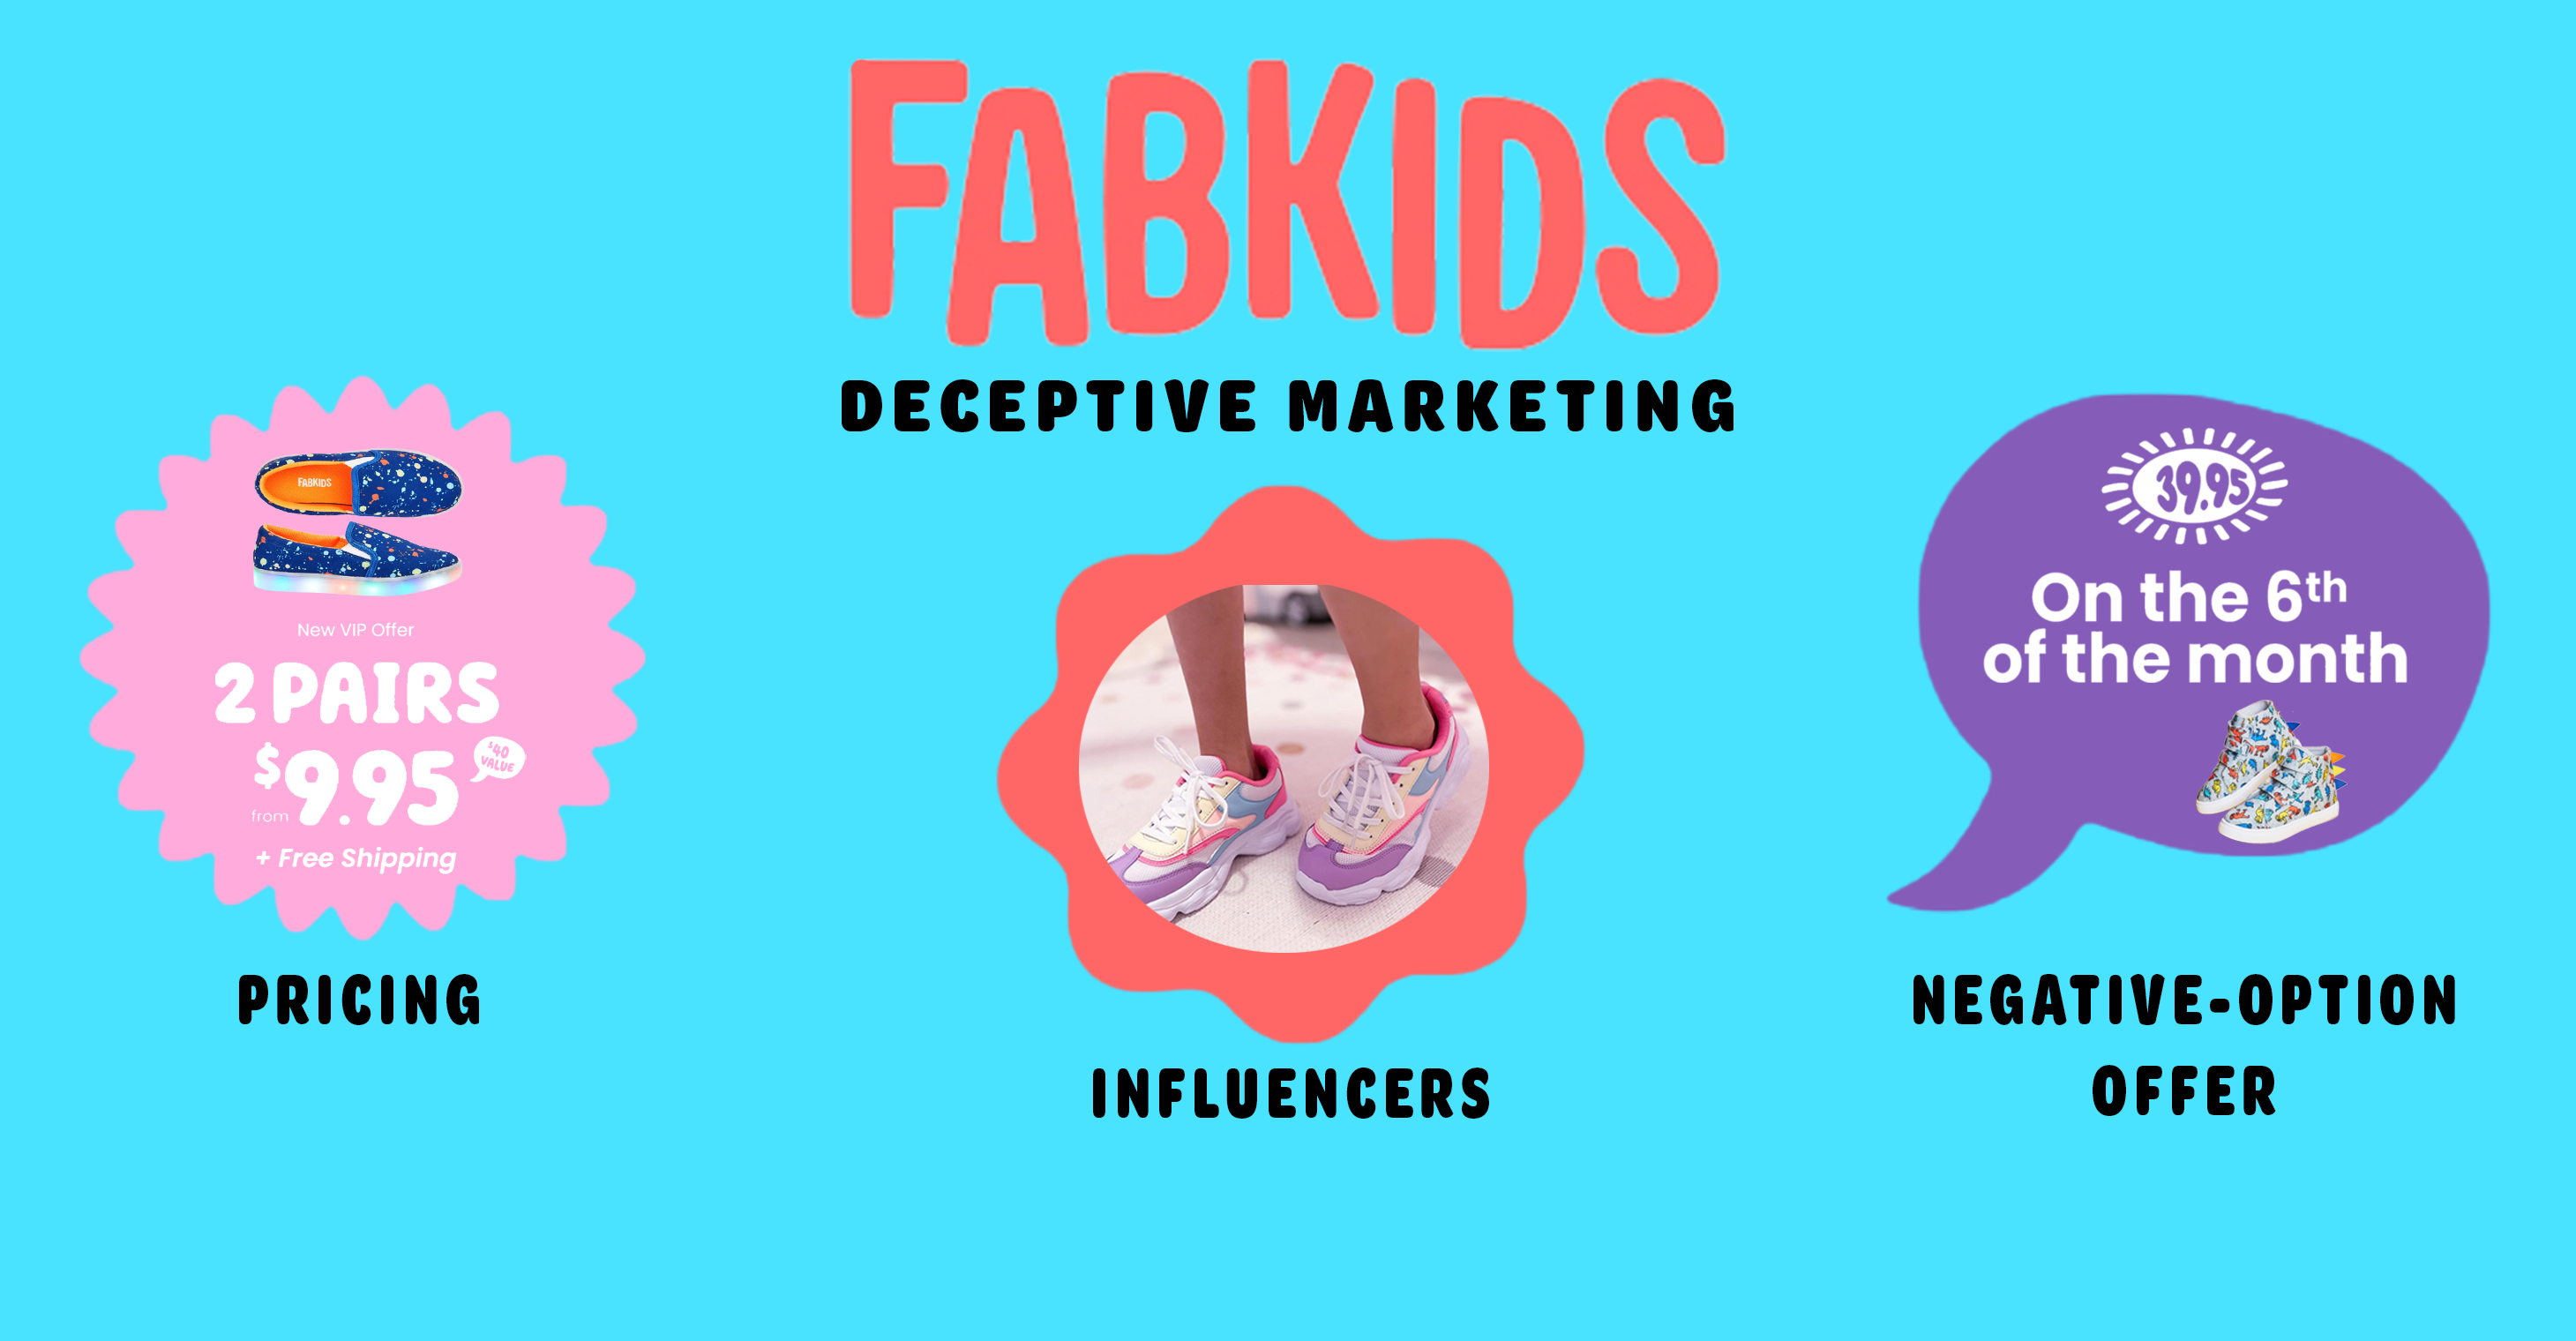 FabKids Deceptive Influencer Marketing - Truth in Advertising